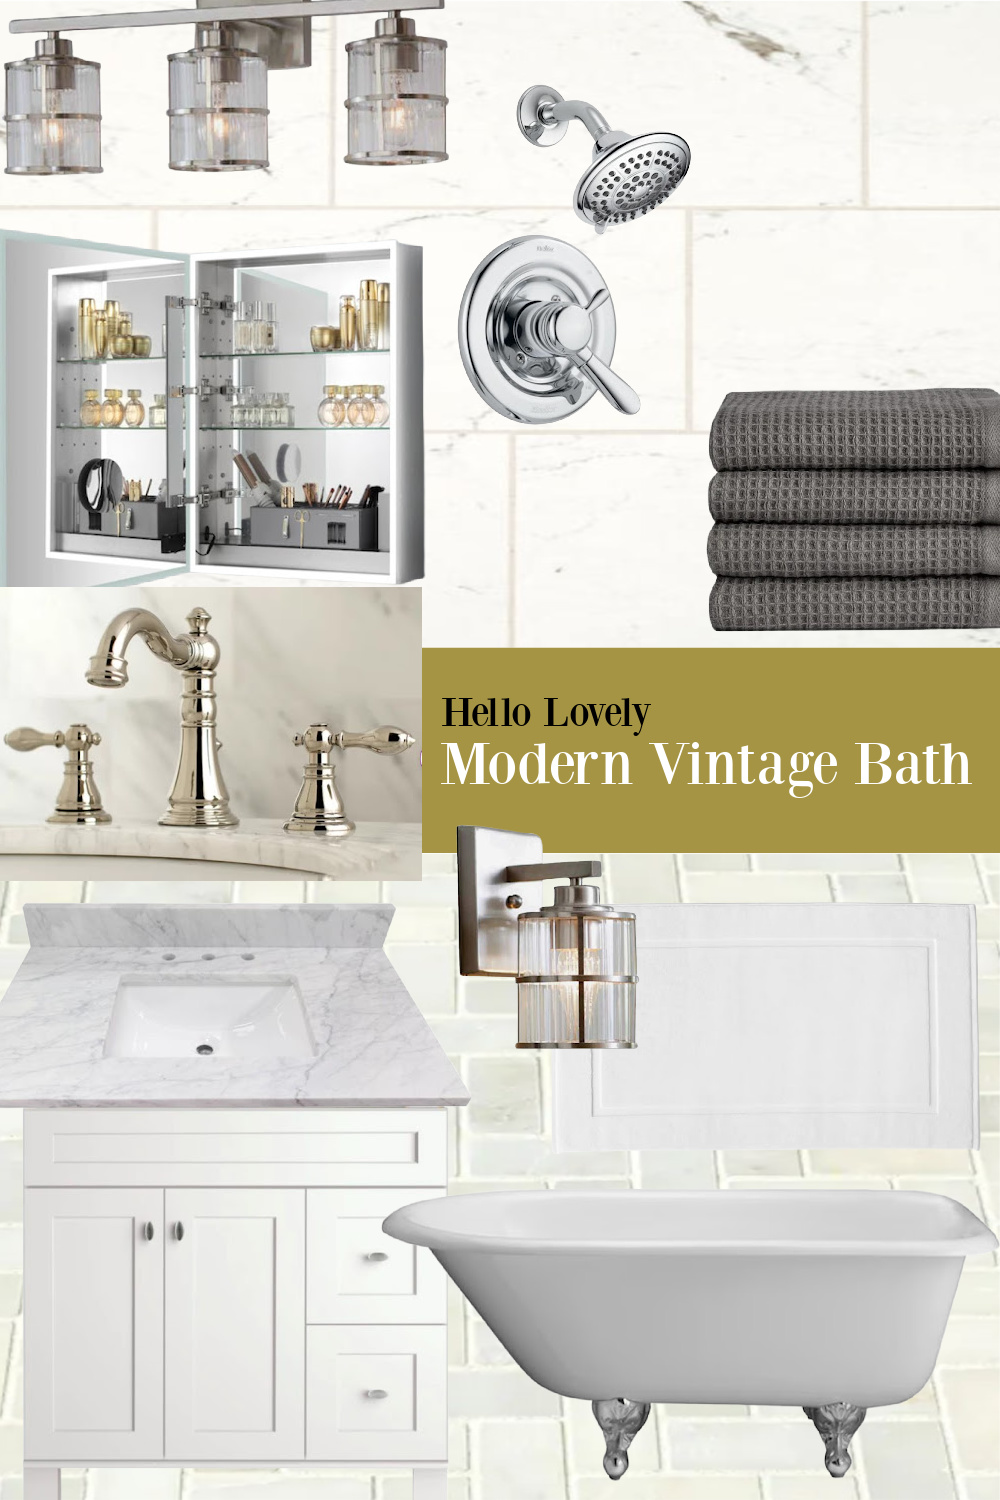 Hello Lovely modern vintage bath mood board resources for our Georgian's primary bath. #modernvintage #bathrooms